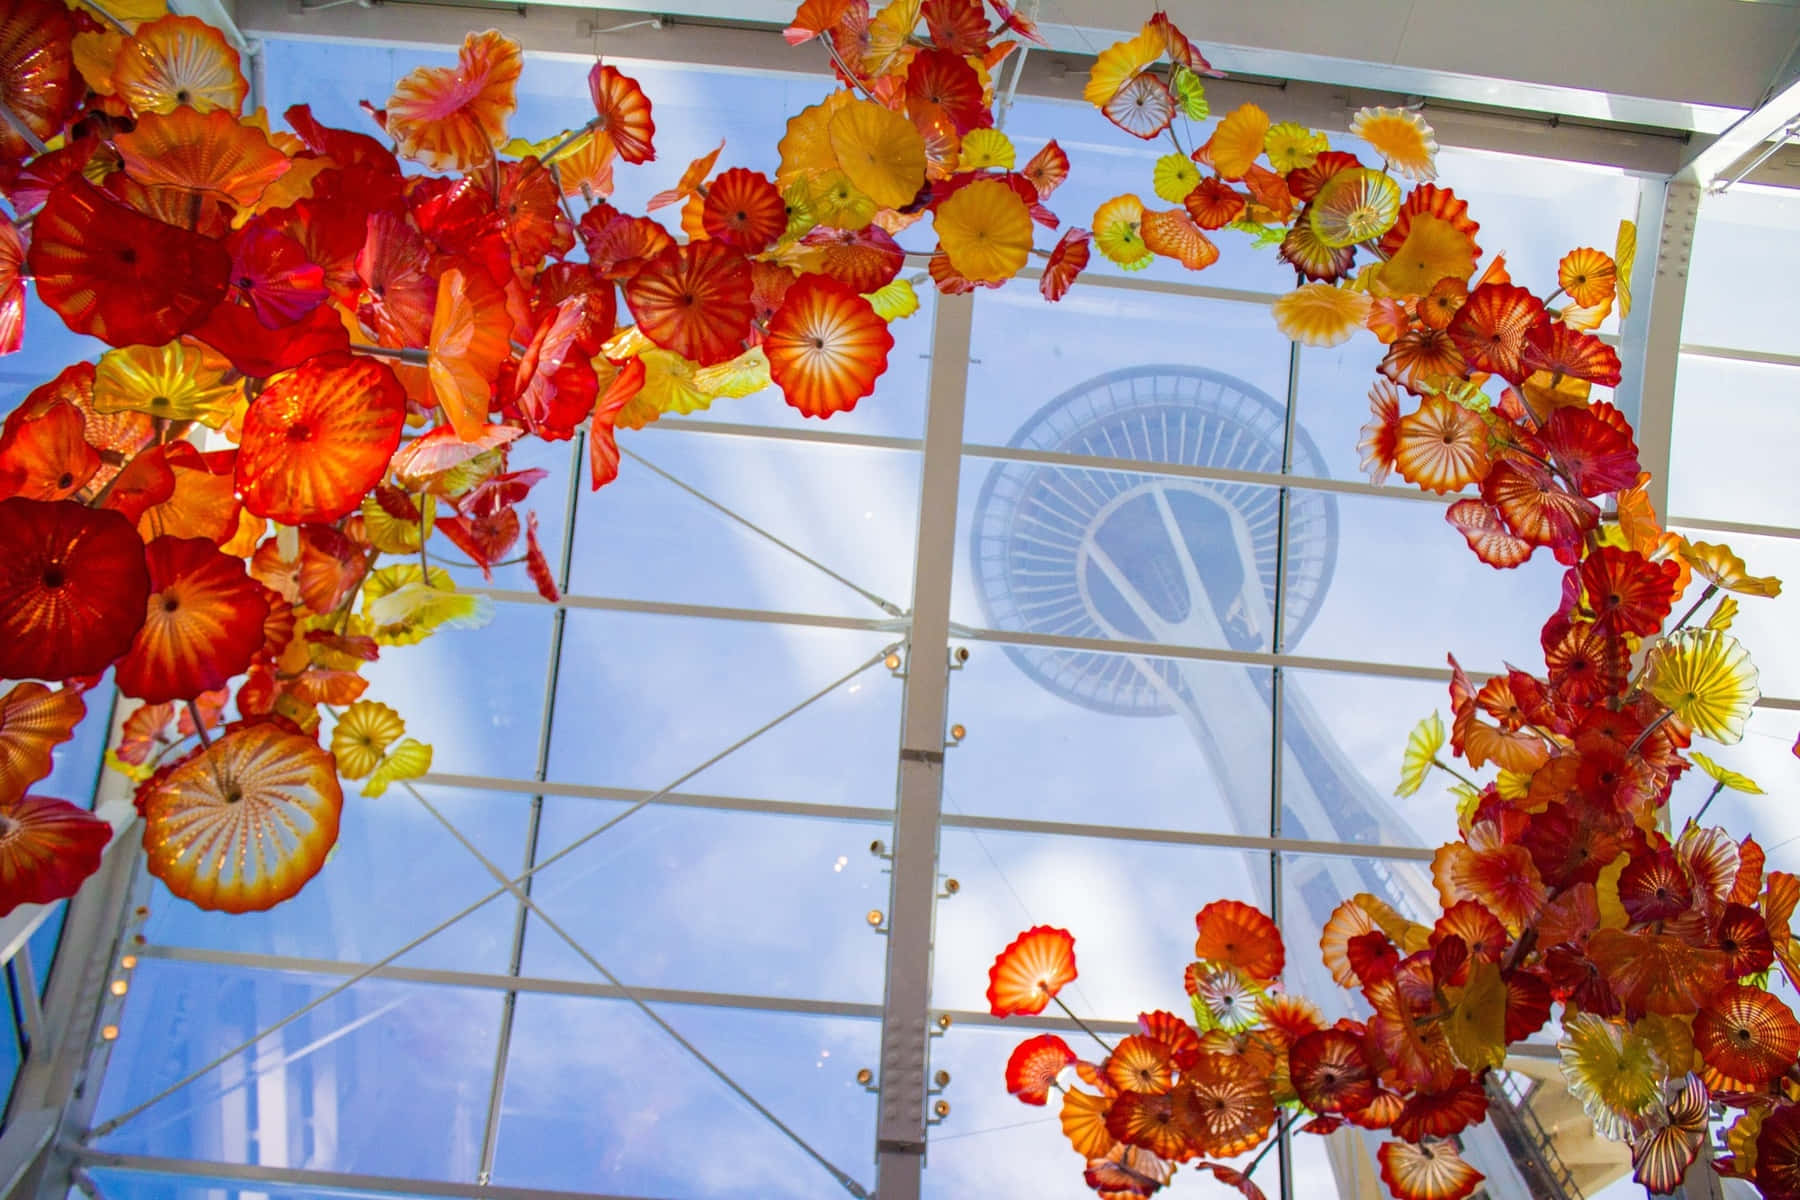 Chihuly Glass Flowers Space Needle View Wallpaper